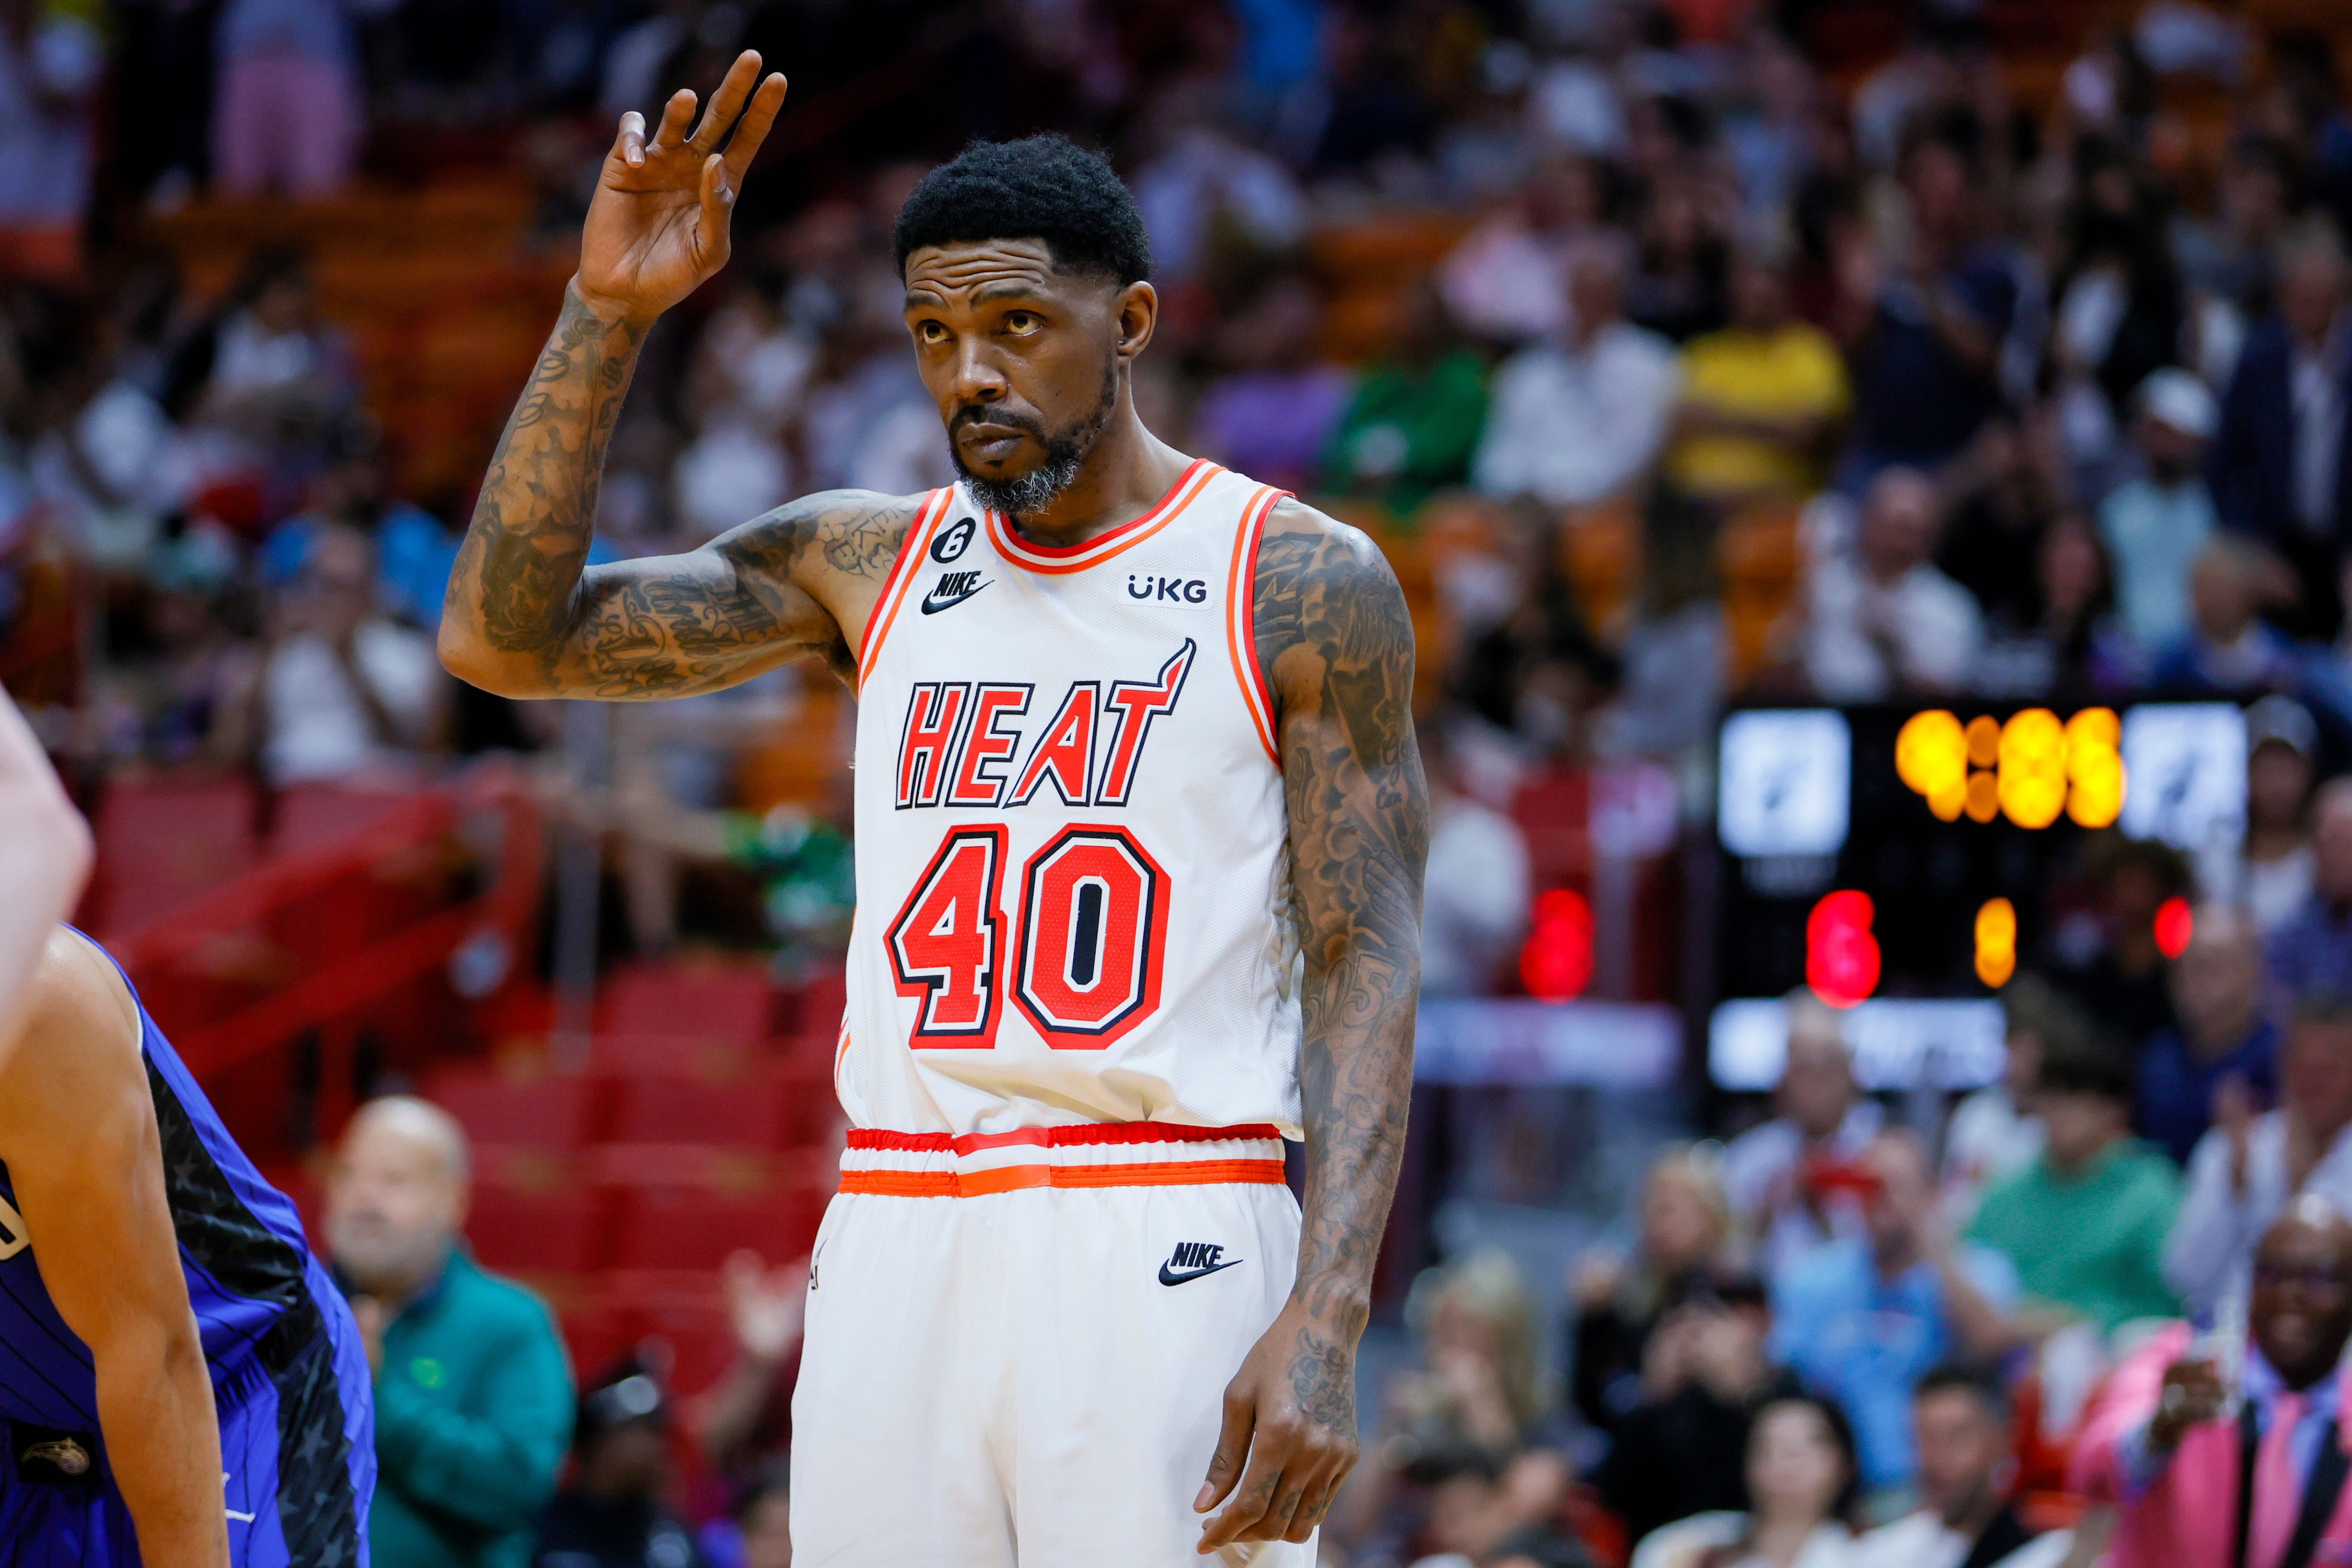 Heat's Udonis Haslem spoke for many Floridians (and Americans) by bashing Ron DeSantis